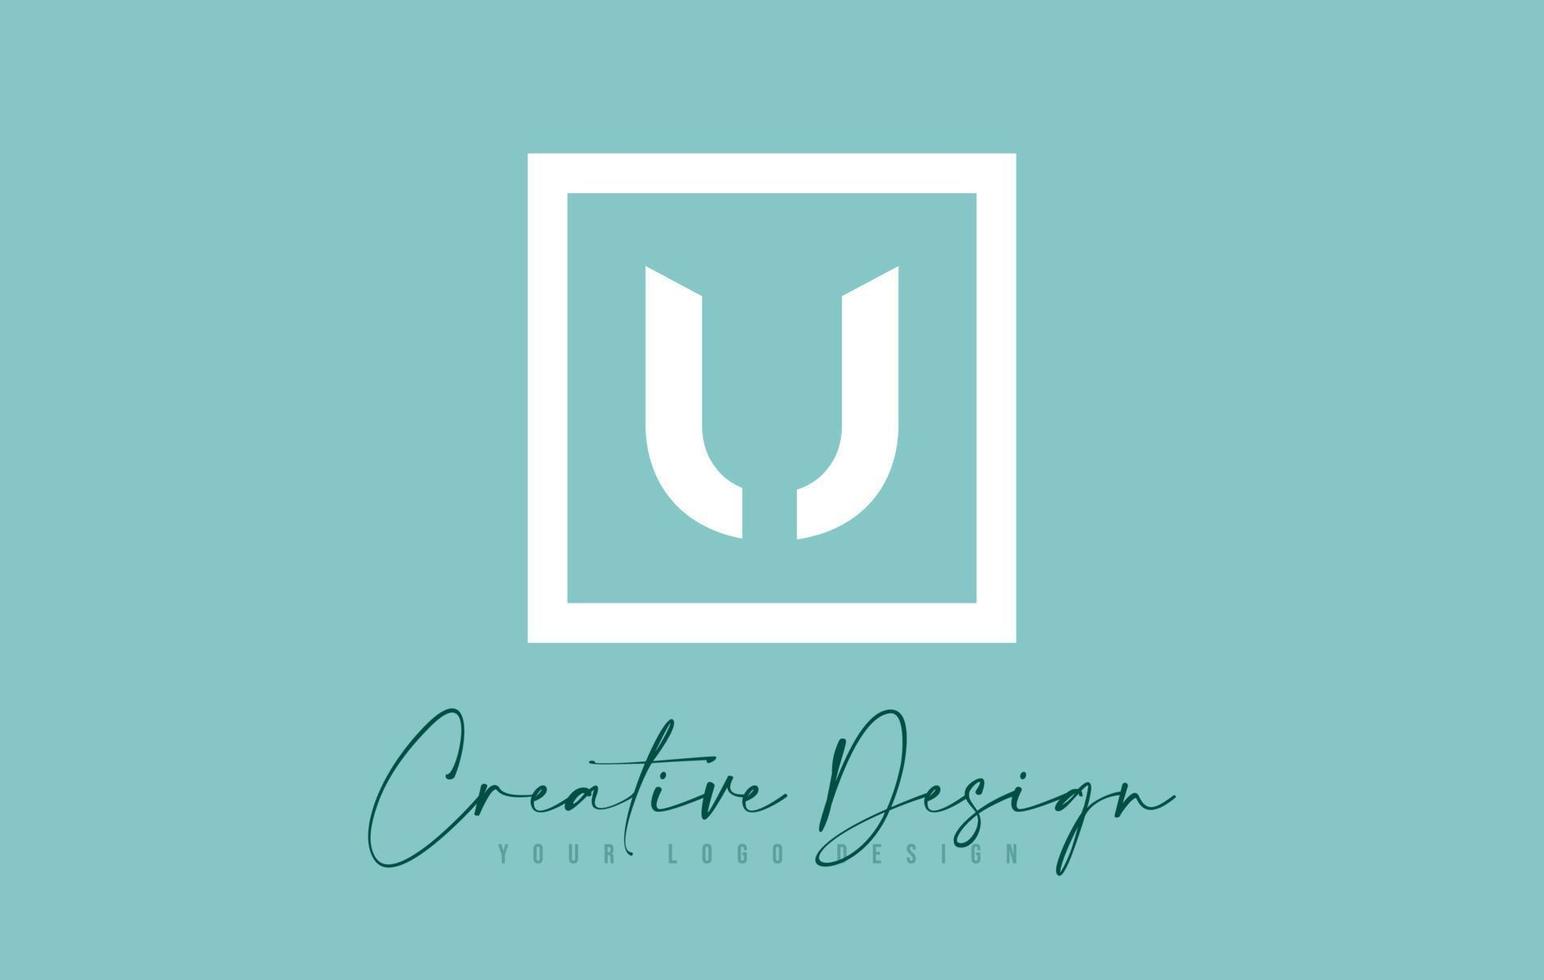 U Letter Icon Design With Creative Modern Look and Teal Background. vector